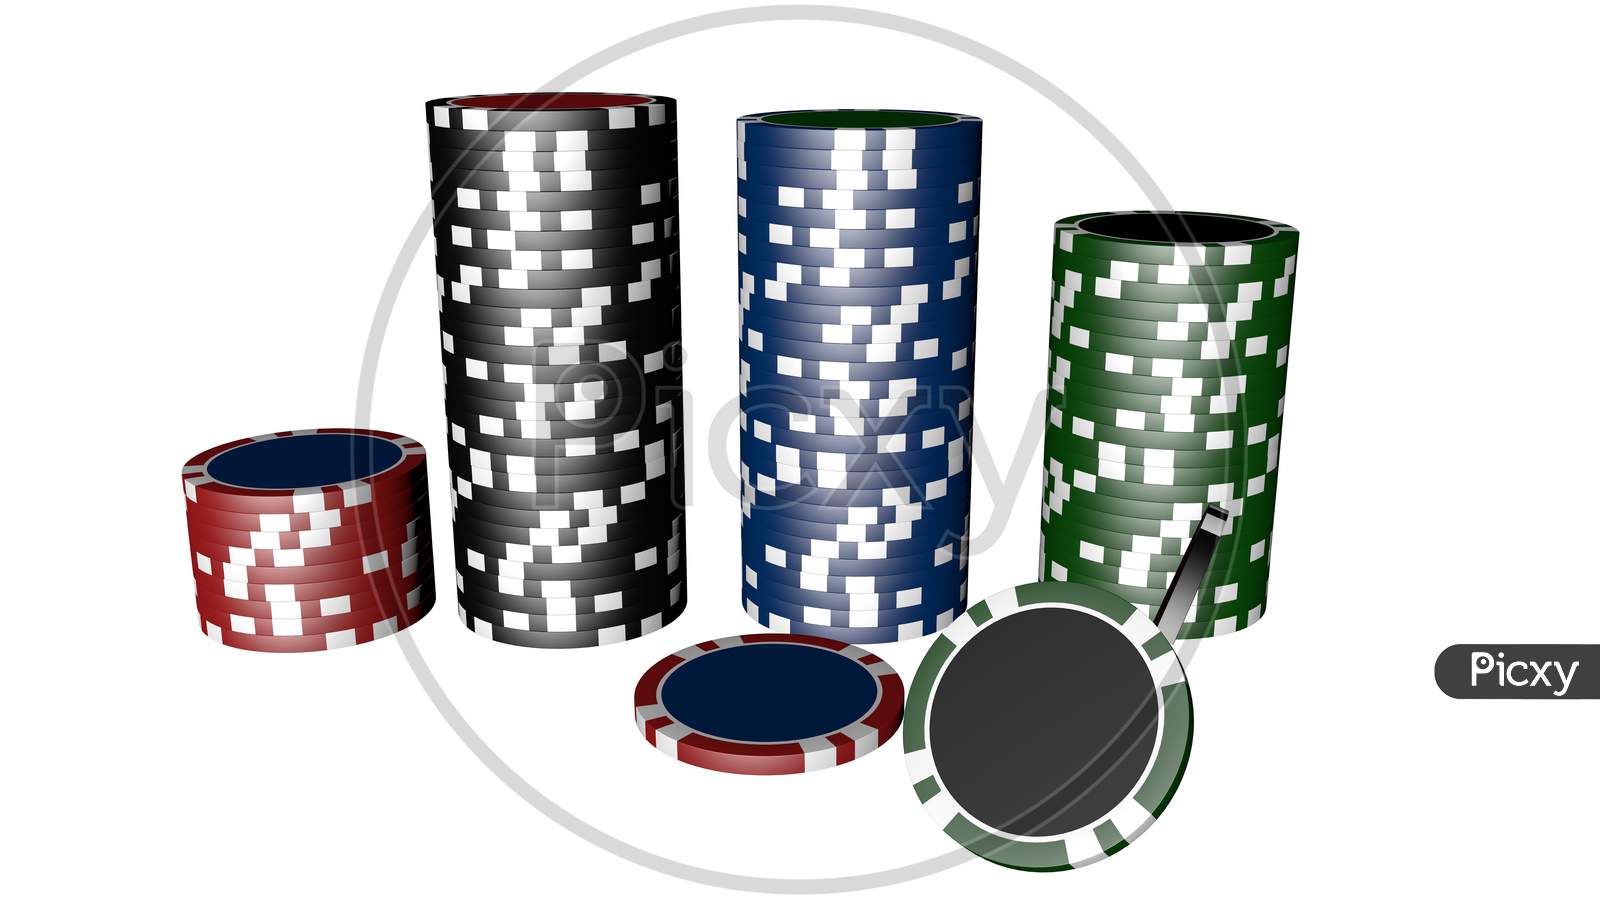 Set Of Poker Chips Of Different Colors Isolated On White Background.